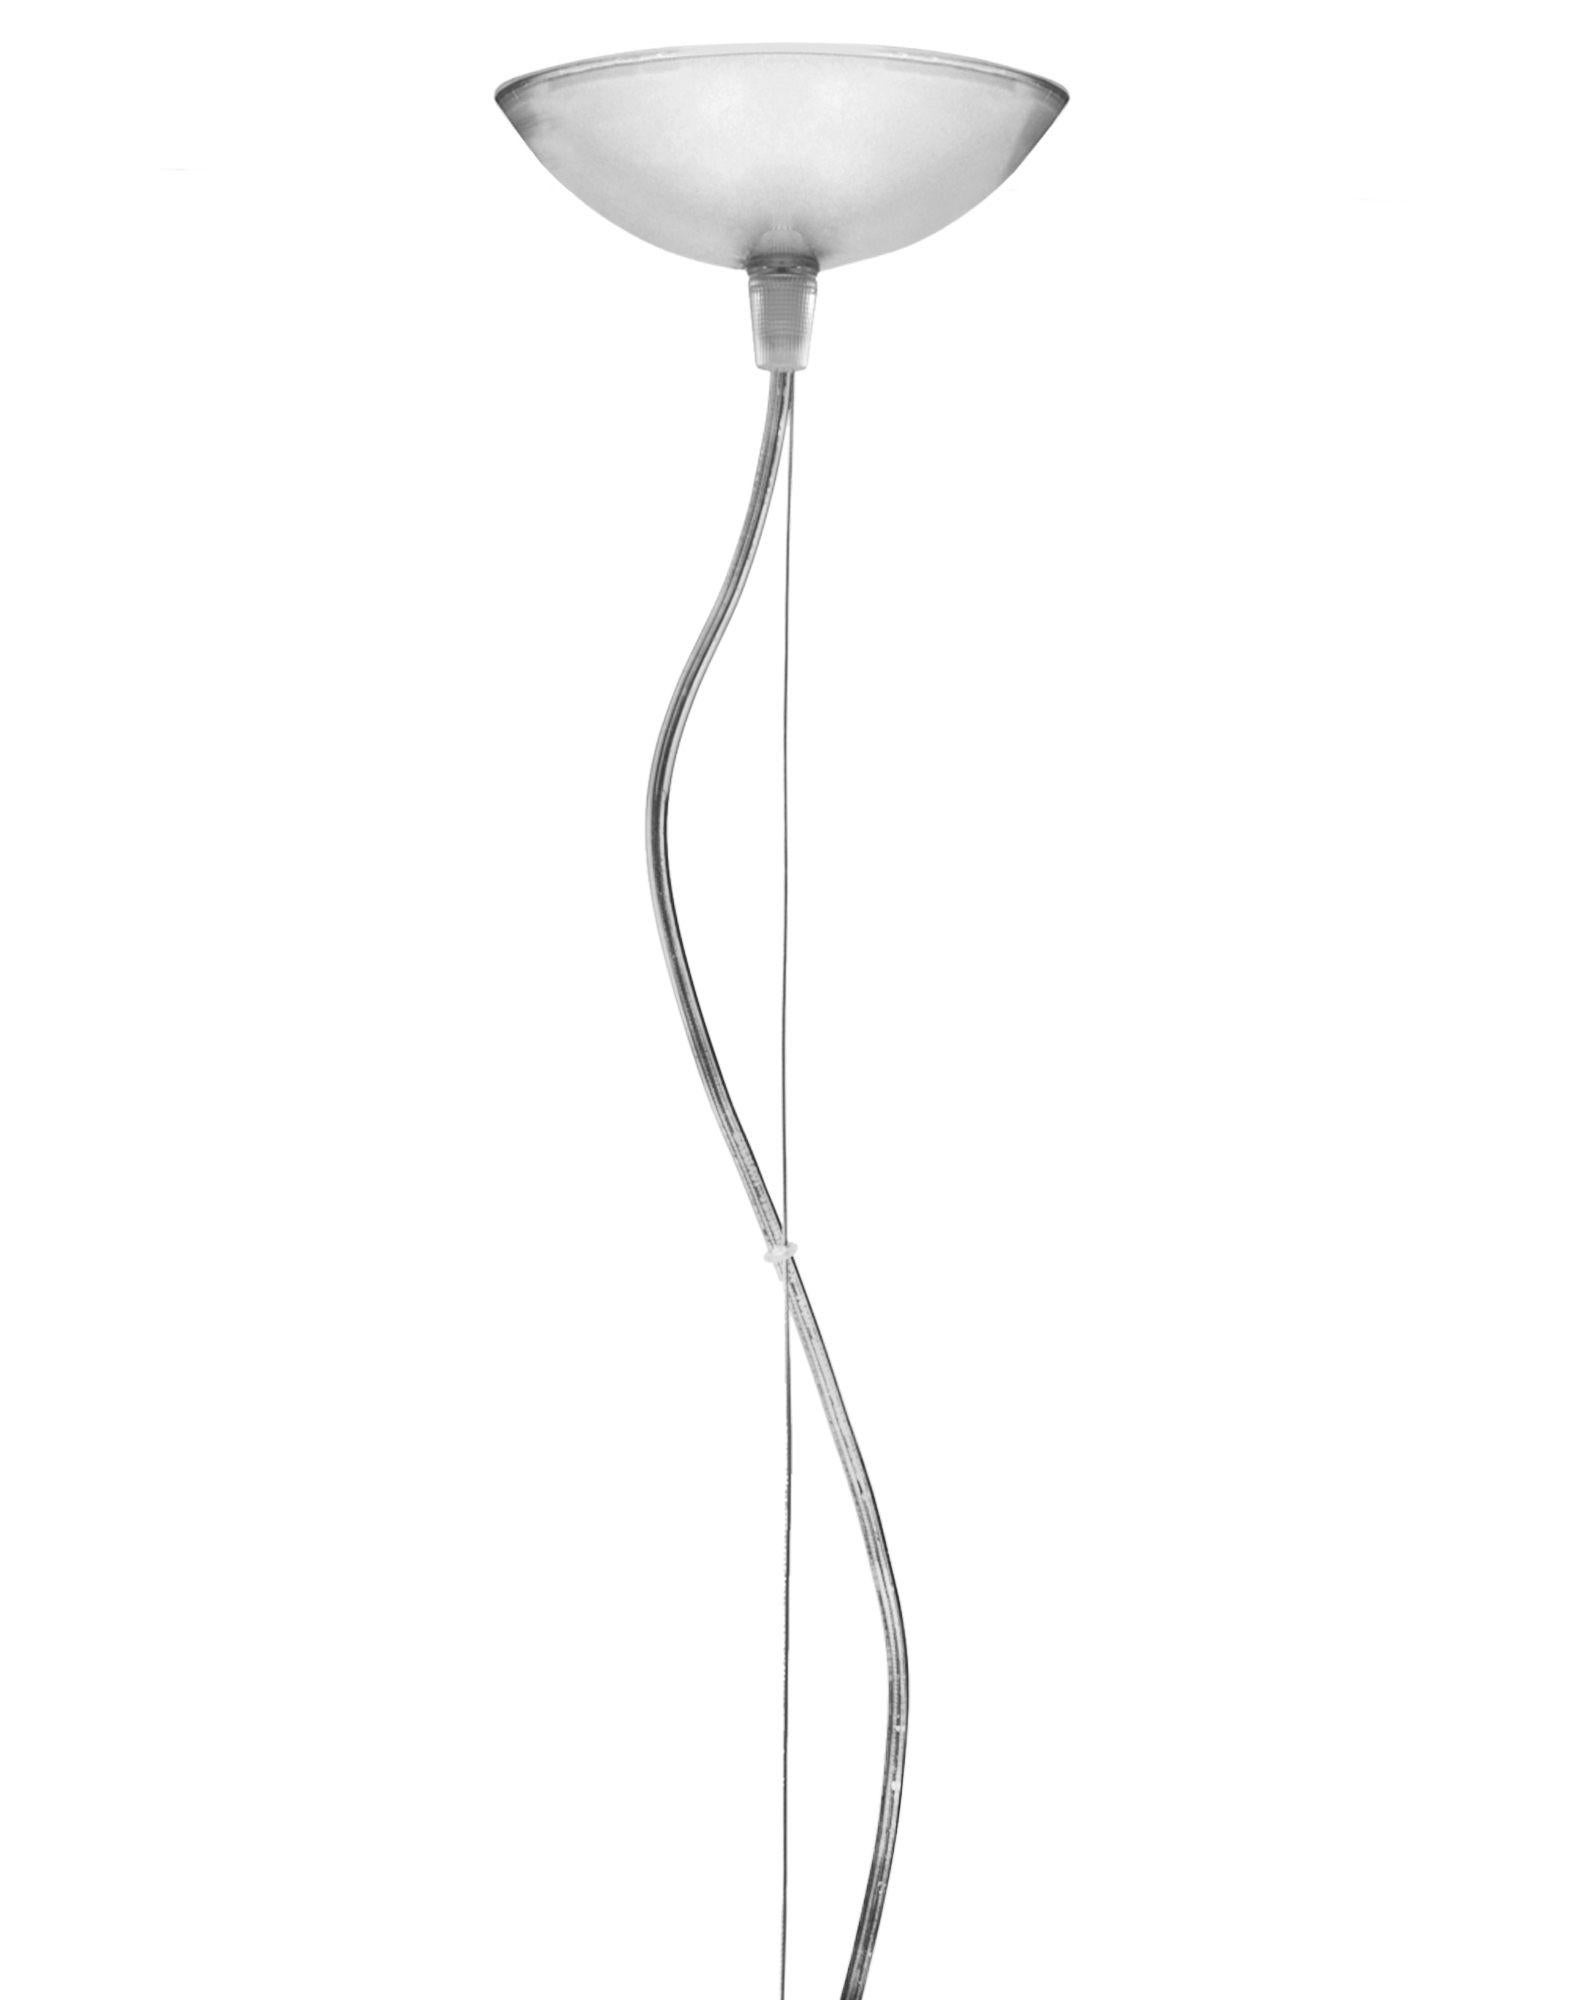 FL/Y pendant light small in crystal. It is a collection of pendant lamps designed by Ferruccio Laviani in 2002.

Dimensions: Shade height 11 in.; diameter 15 in.; unit weight 1.08 kg.; made of: PMMA. Assembly required. Voltage 120. Cord length